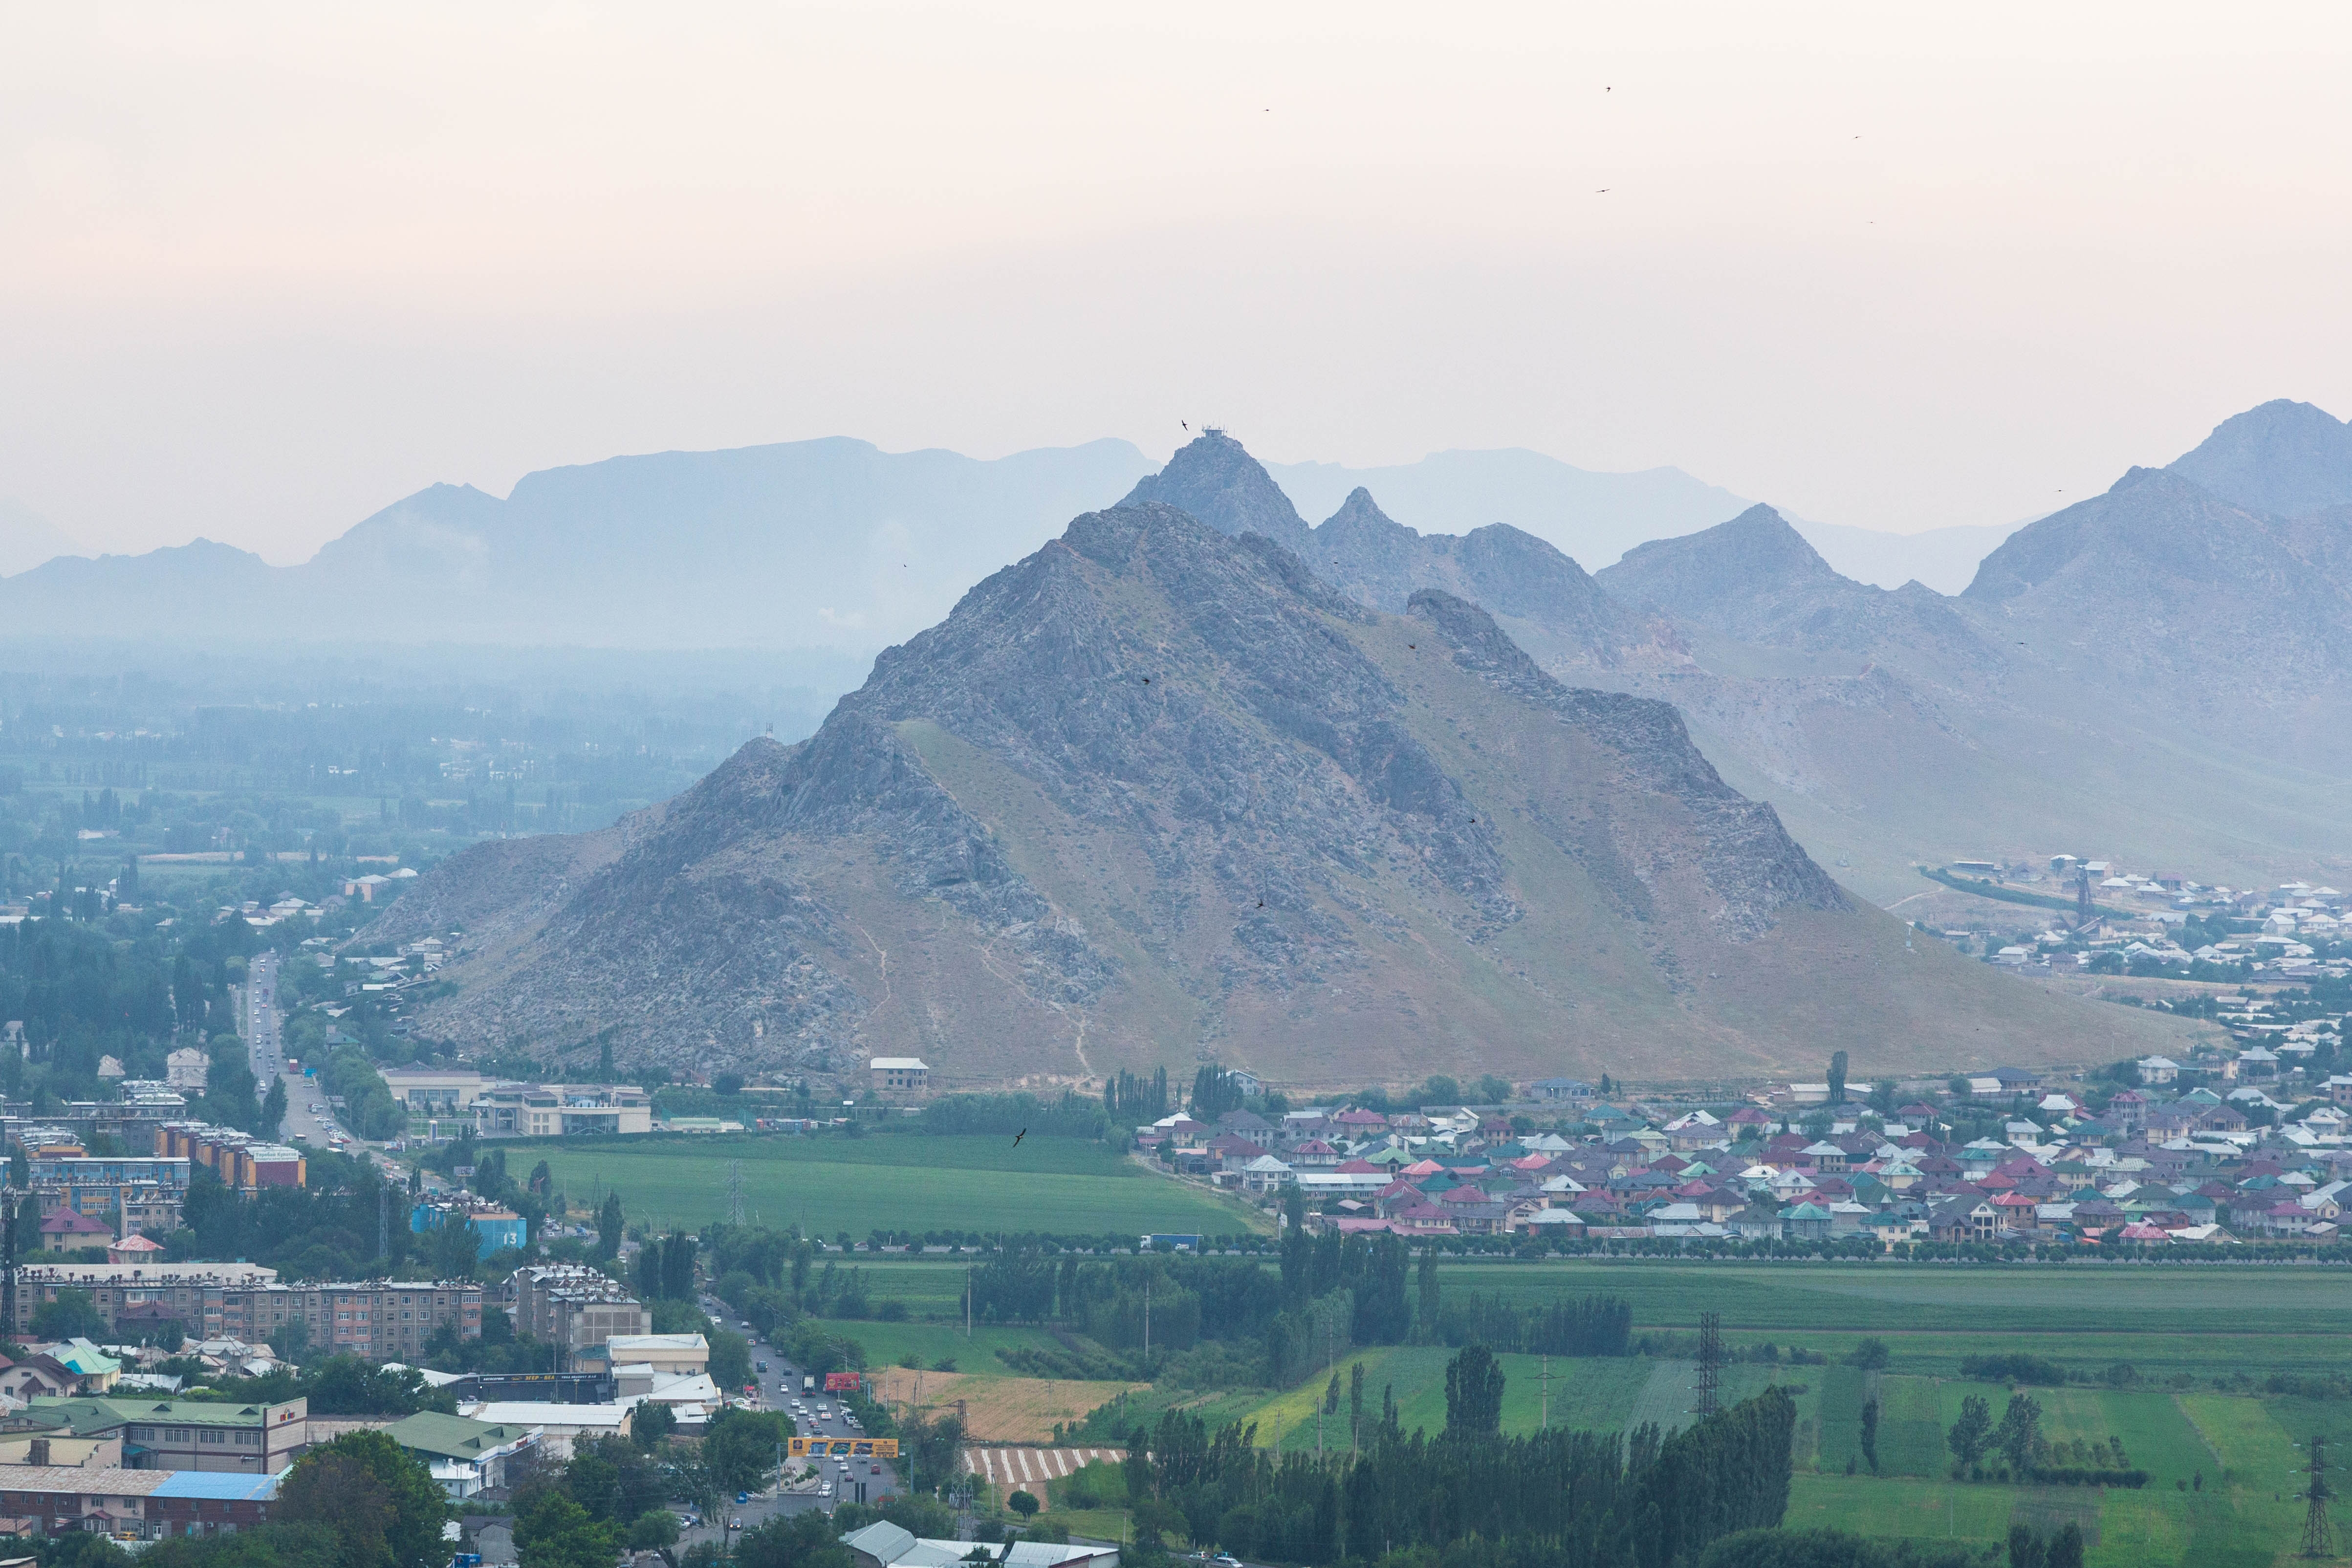 Kyrgyzstan is a beautiful country, Kyrgyz citizenship provides opportunities for foreigners